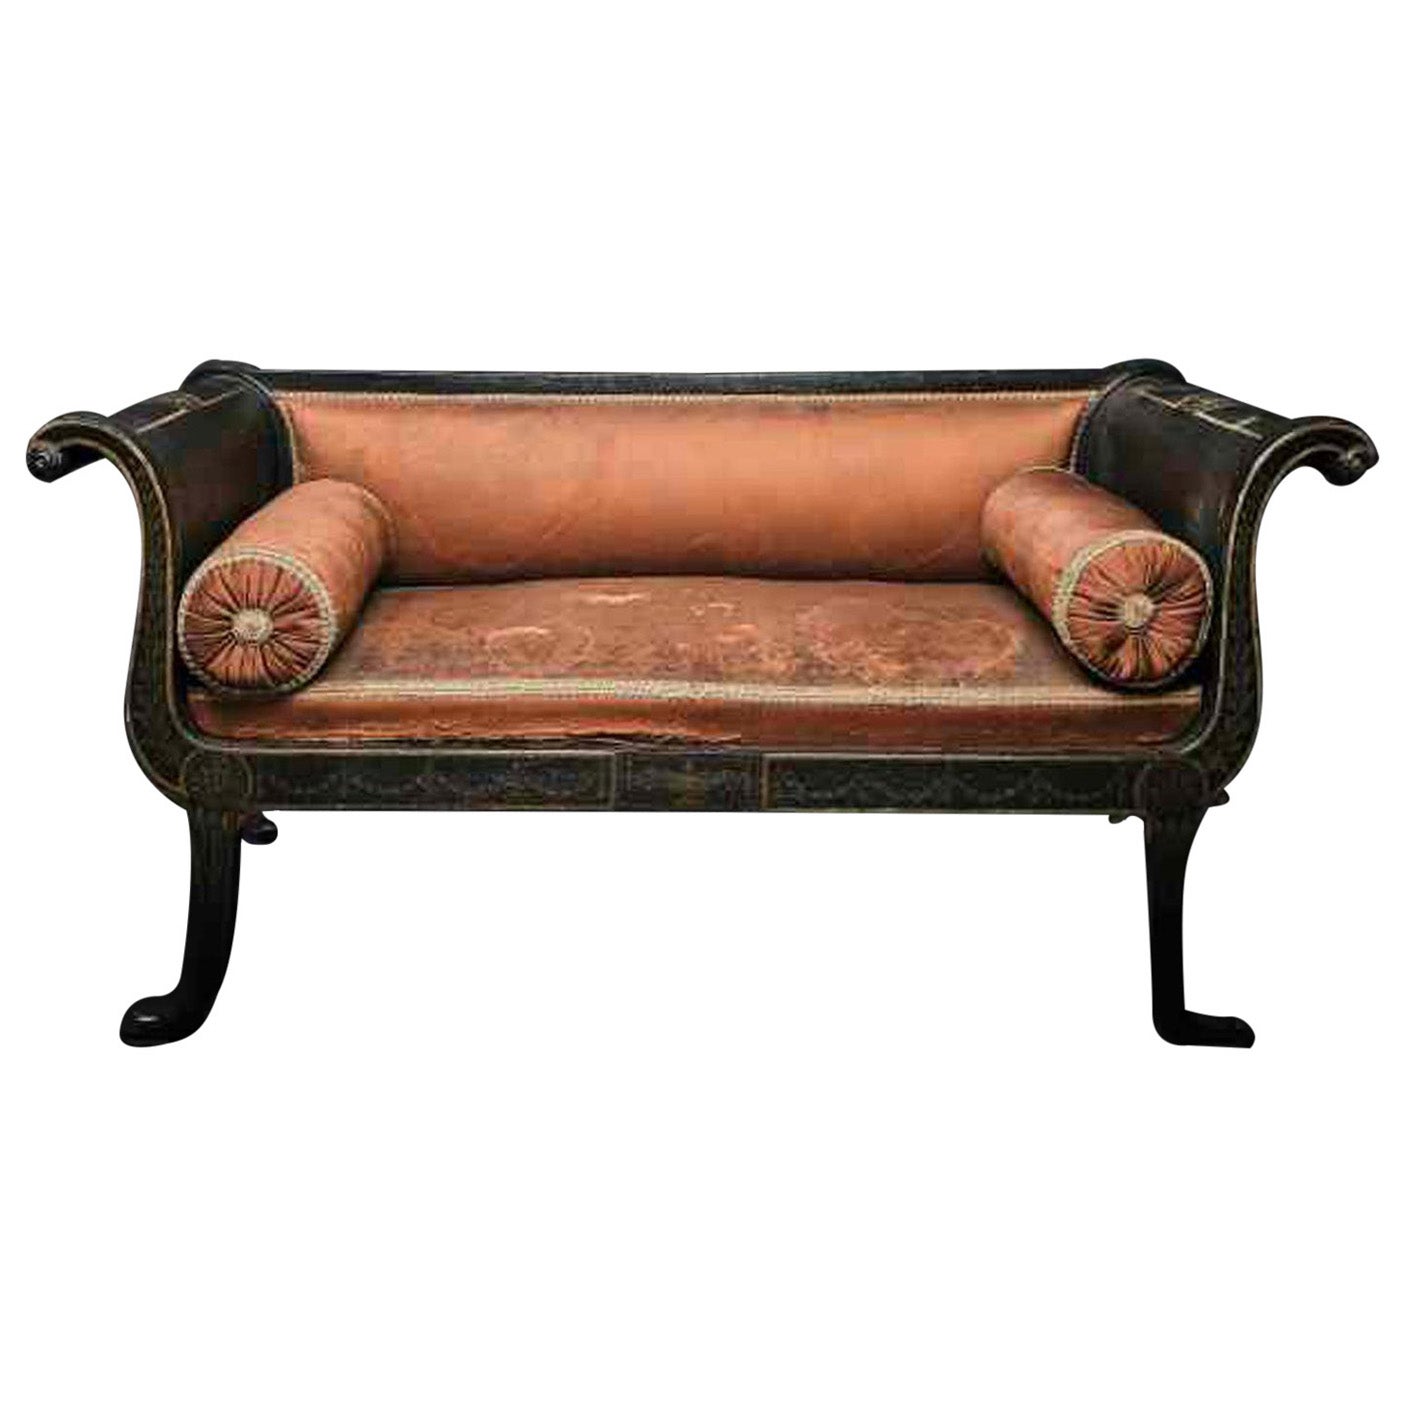 Beautiful Bench Finely Painted in Grisaille, Northern Europe, Early 19th Century